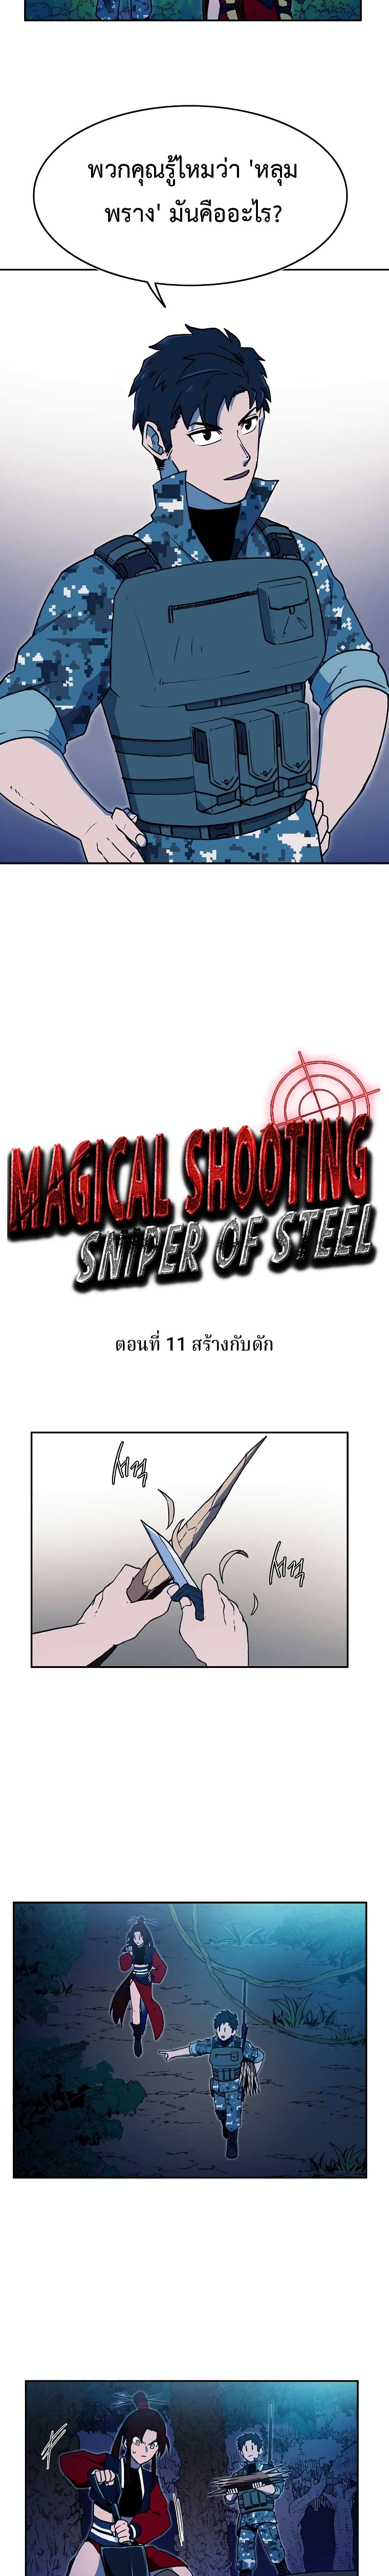 Magical Shooting: Sniper of Steel 11-11